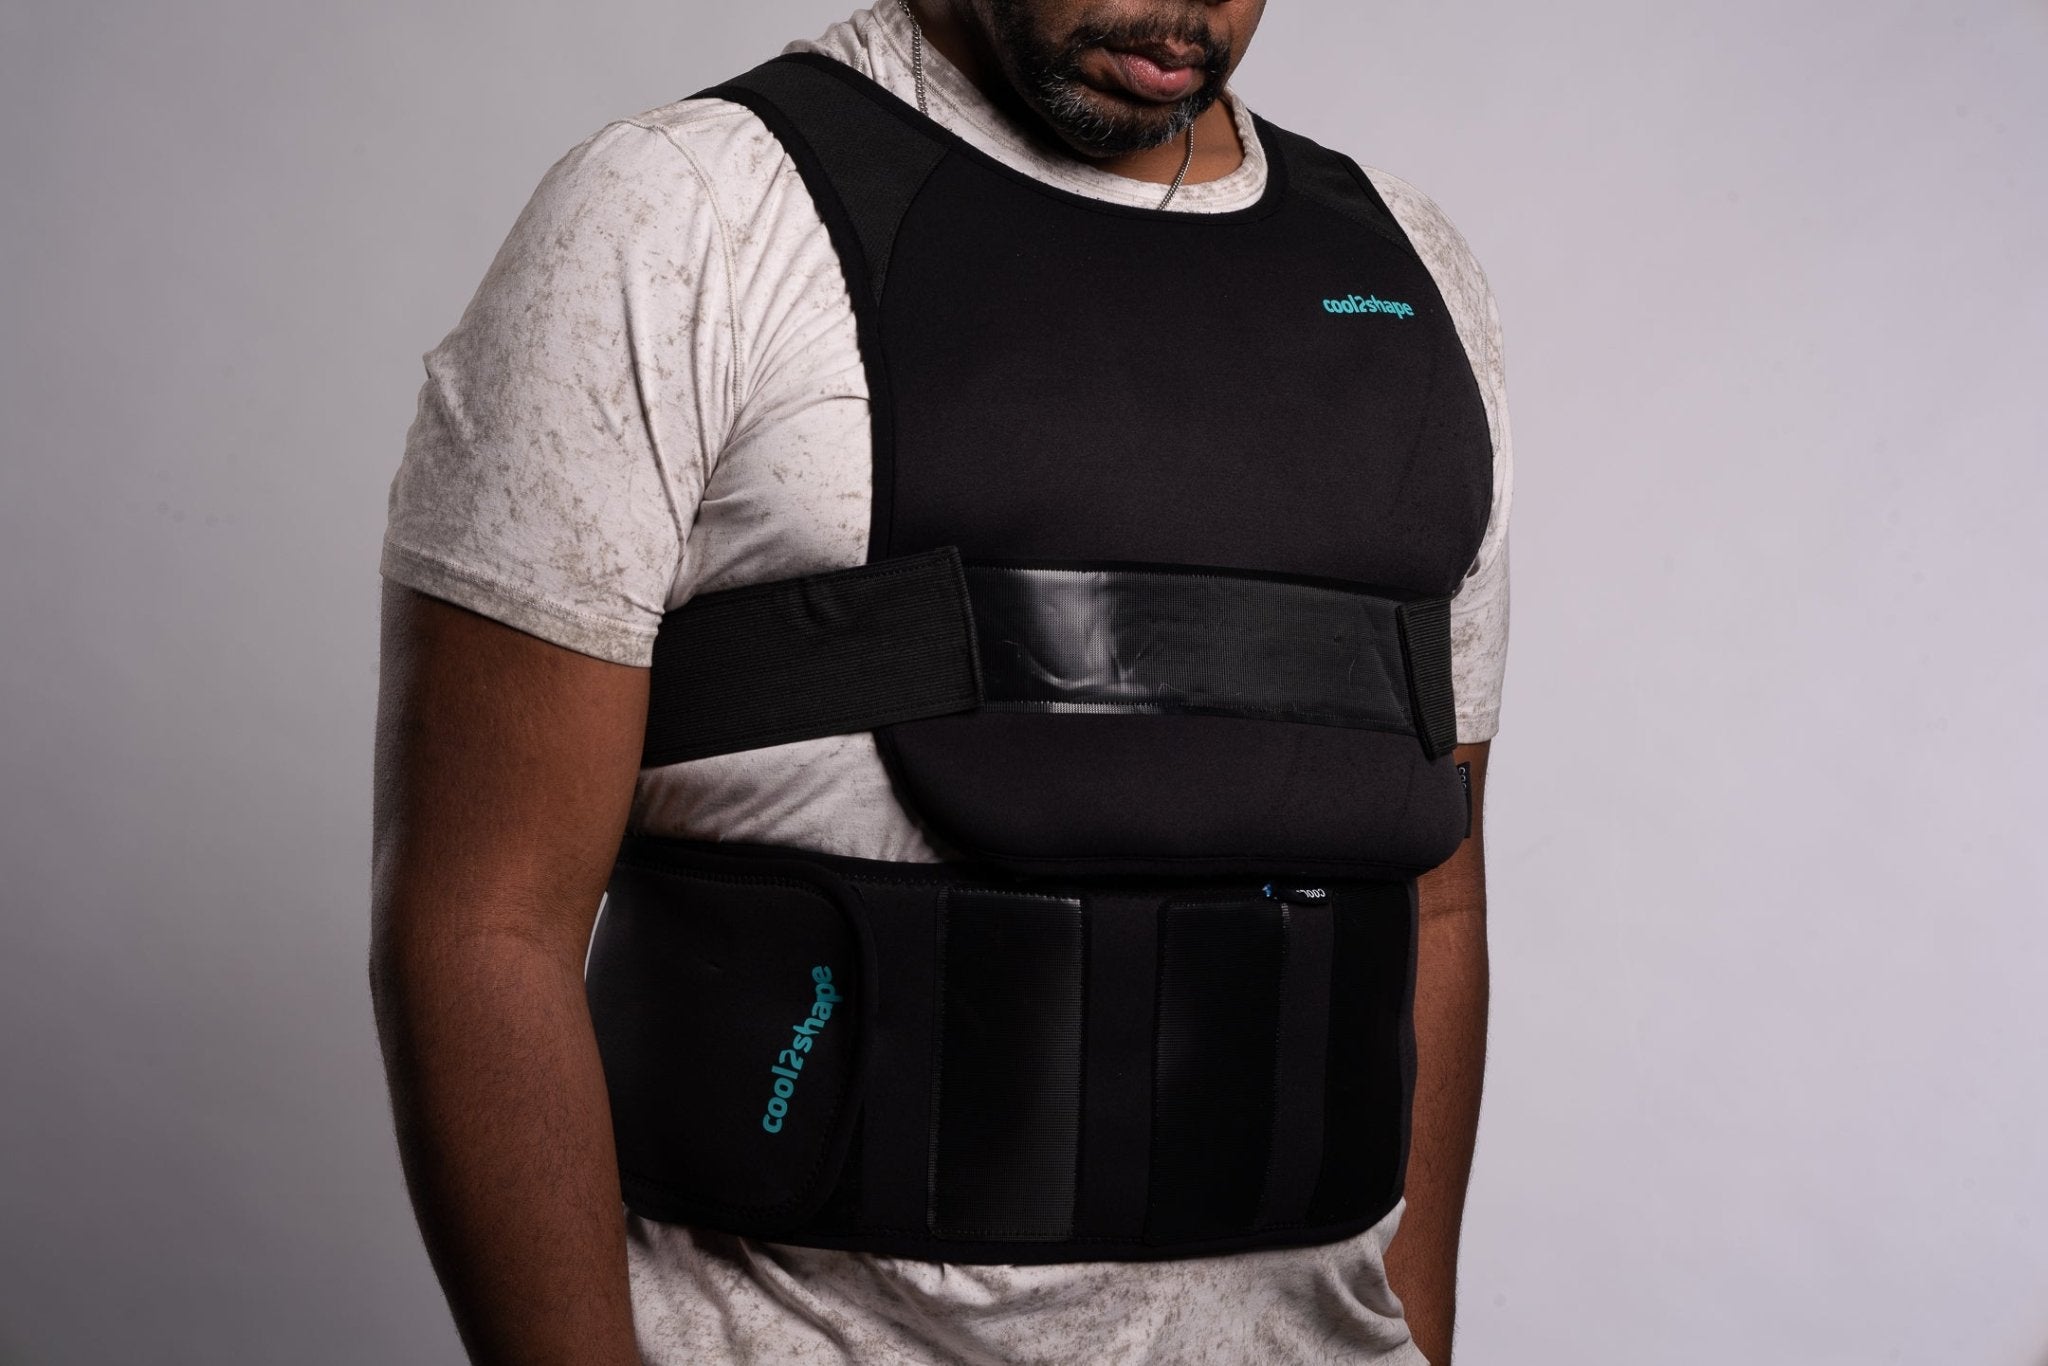 Cooling vest for weight loss next Paleo Diet trend? - Hyperwear